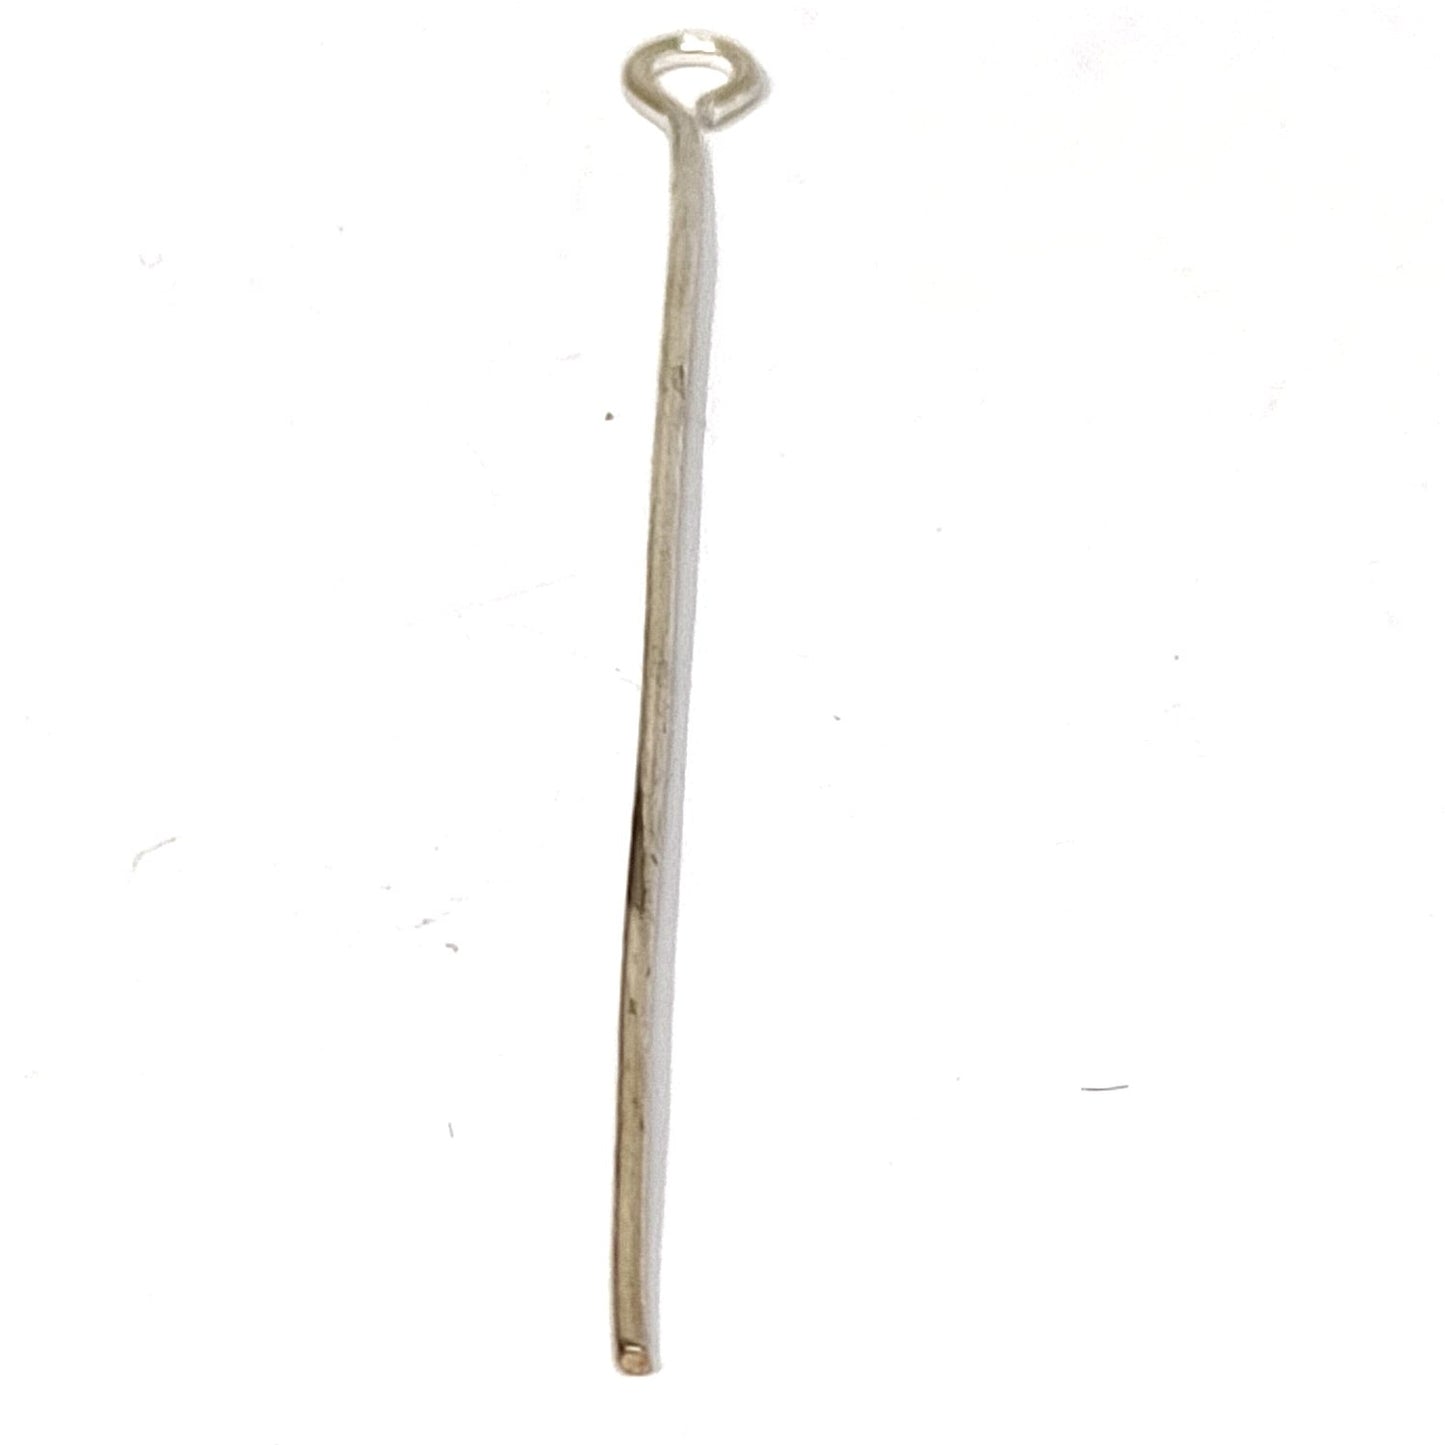 5 cm Silver Eye Pins for Making Earrings and Jewellery (25 Pcs) - 96-25